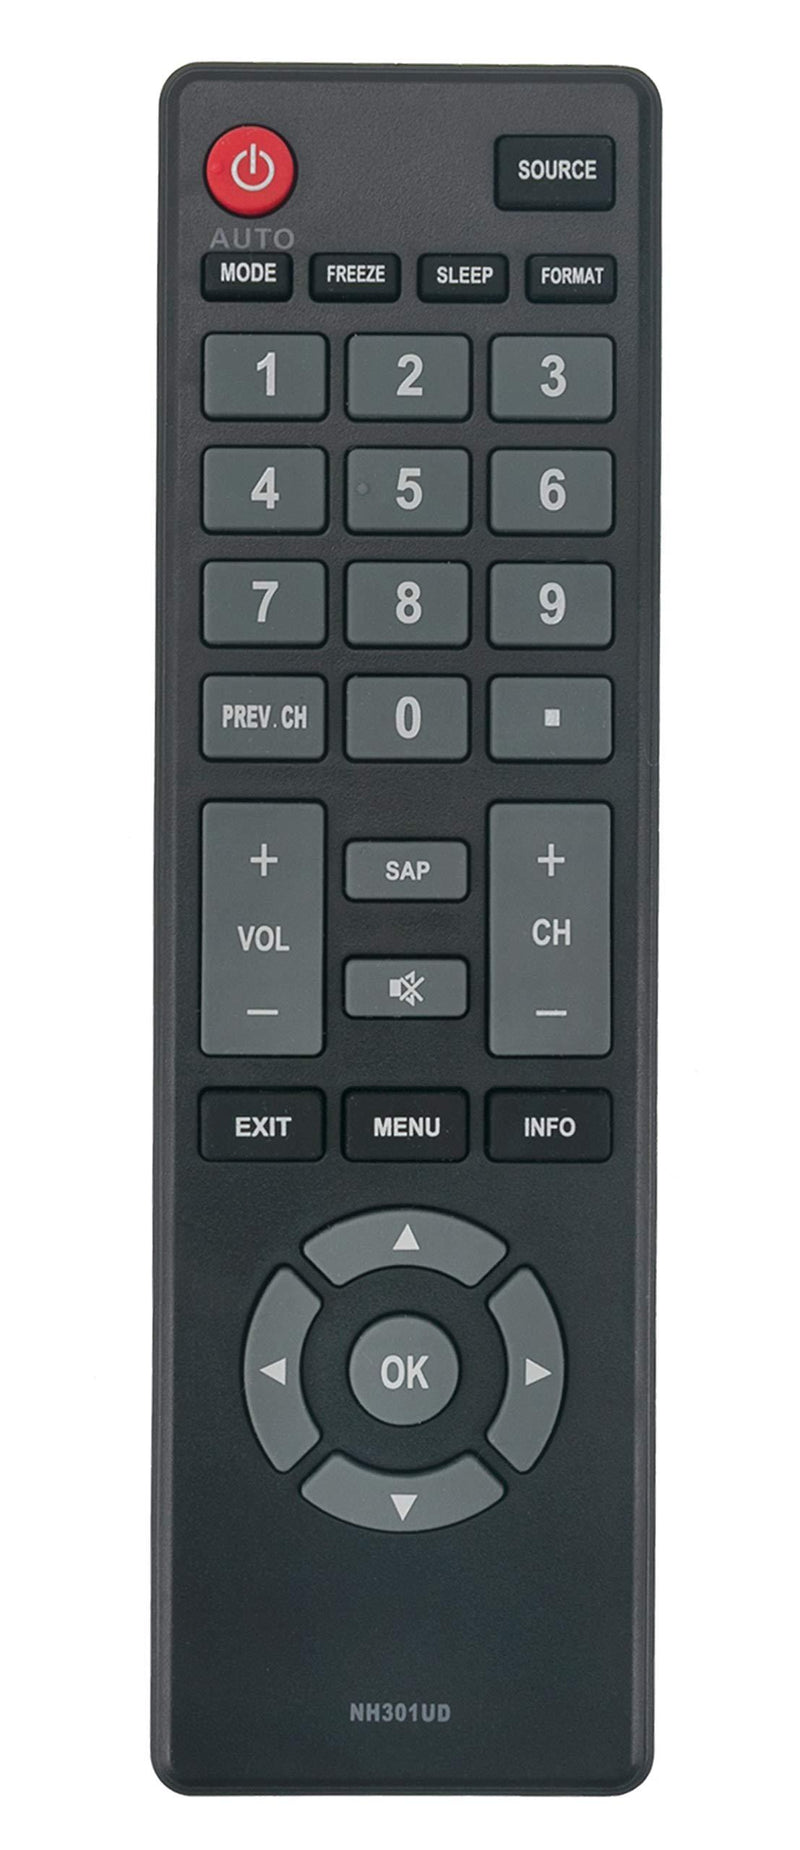 VINABTY NH301UD Replaced Remote fit for Emerson TV LC391EM3 LC501EM3 LE190EM3 LE220EM3 LE260EM3 LE320EM3 - LeoForward Australia